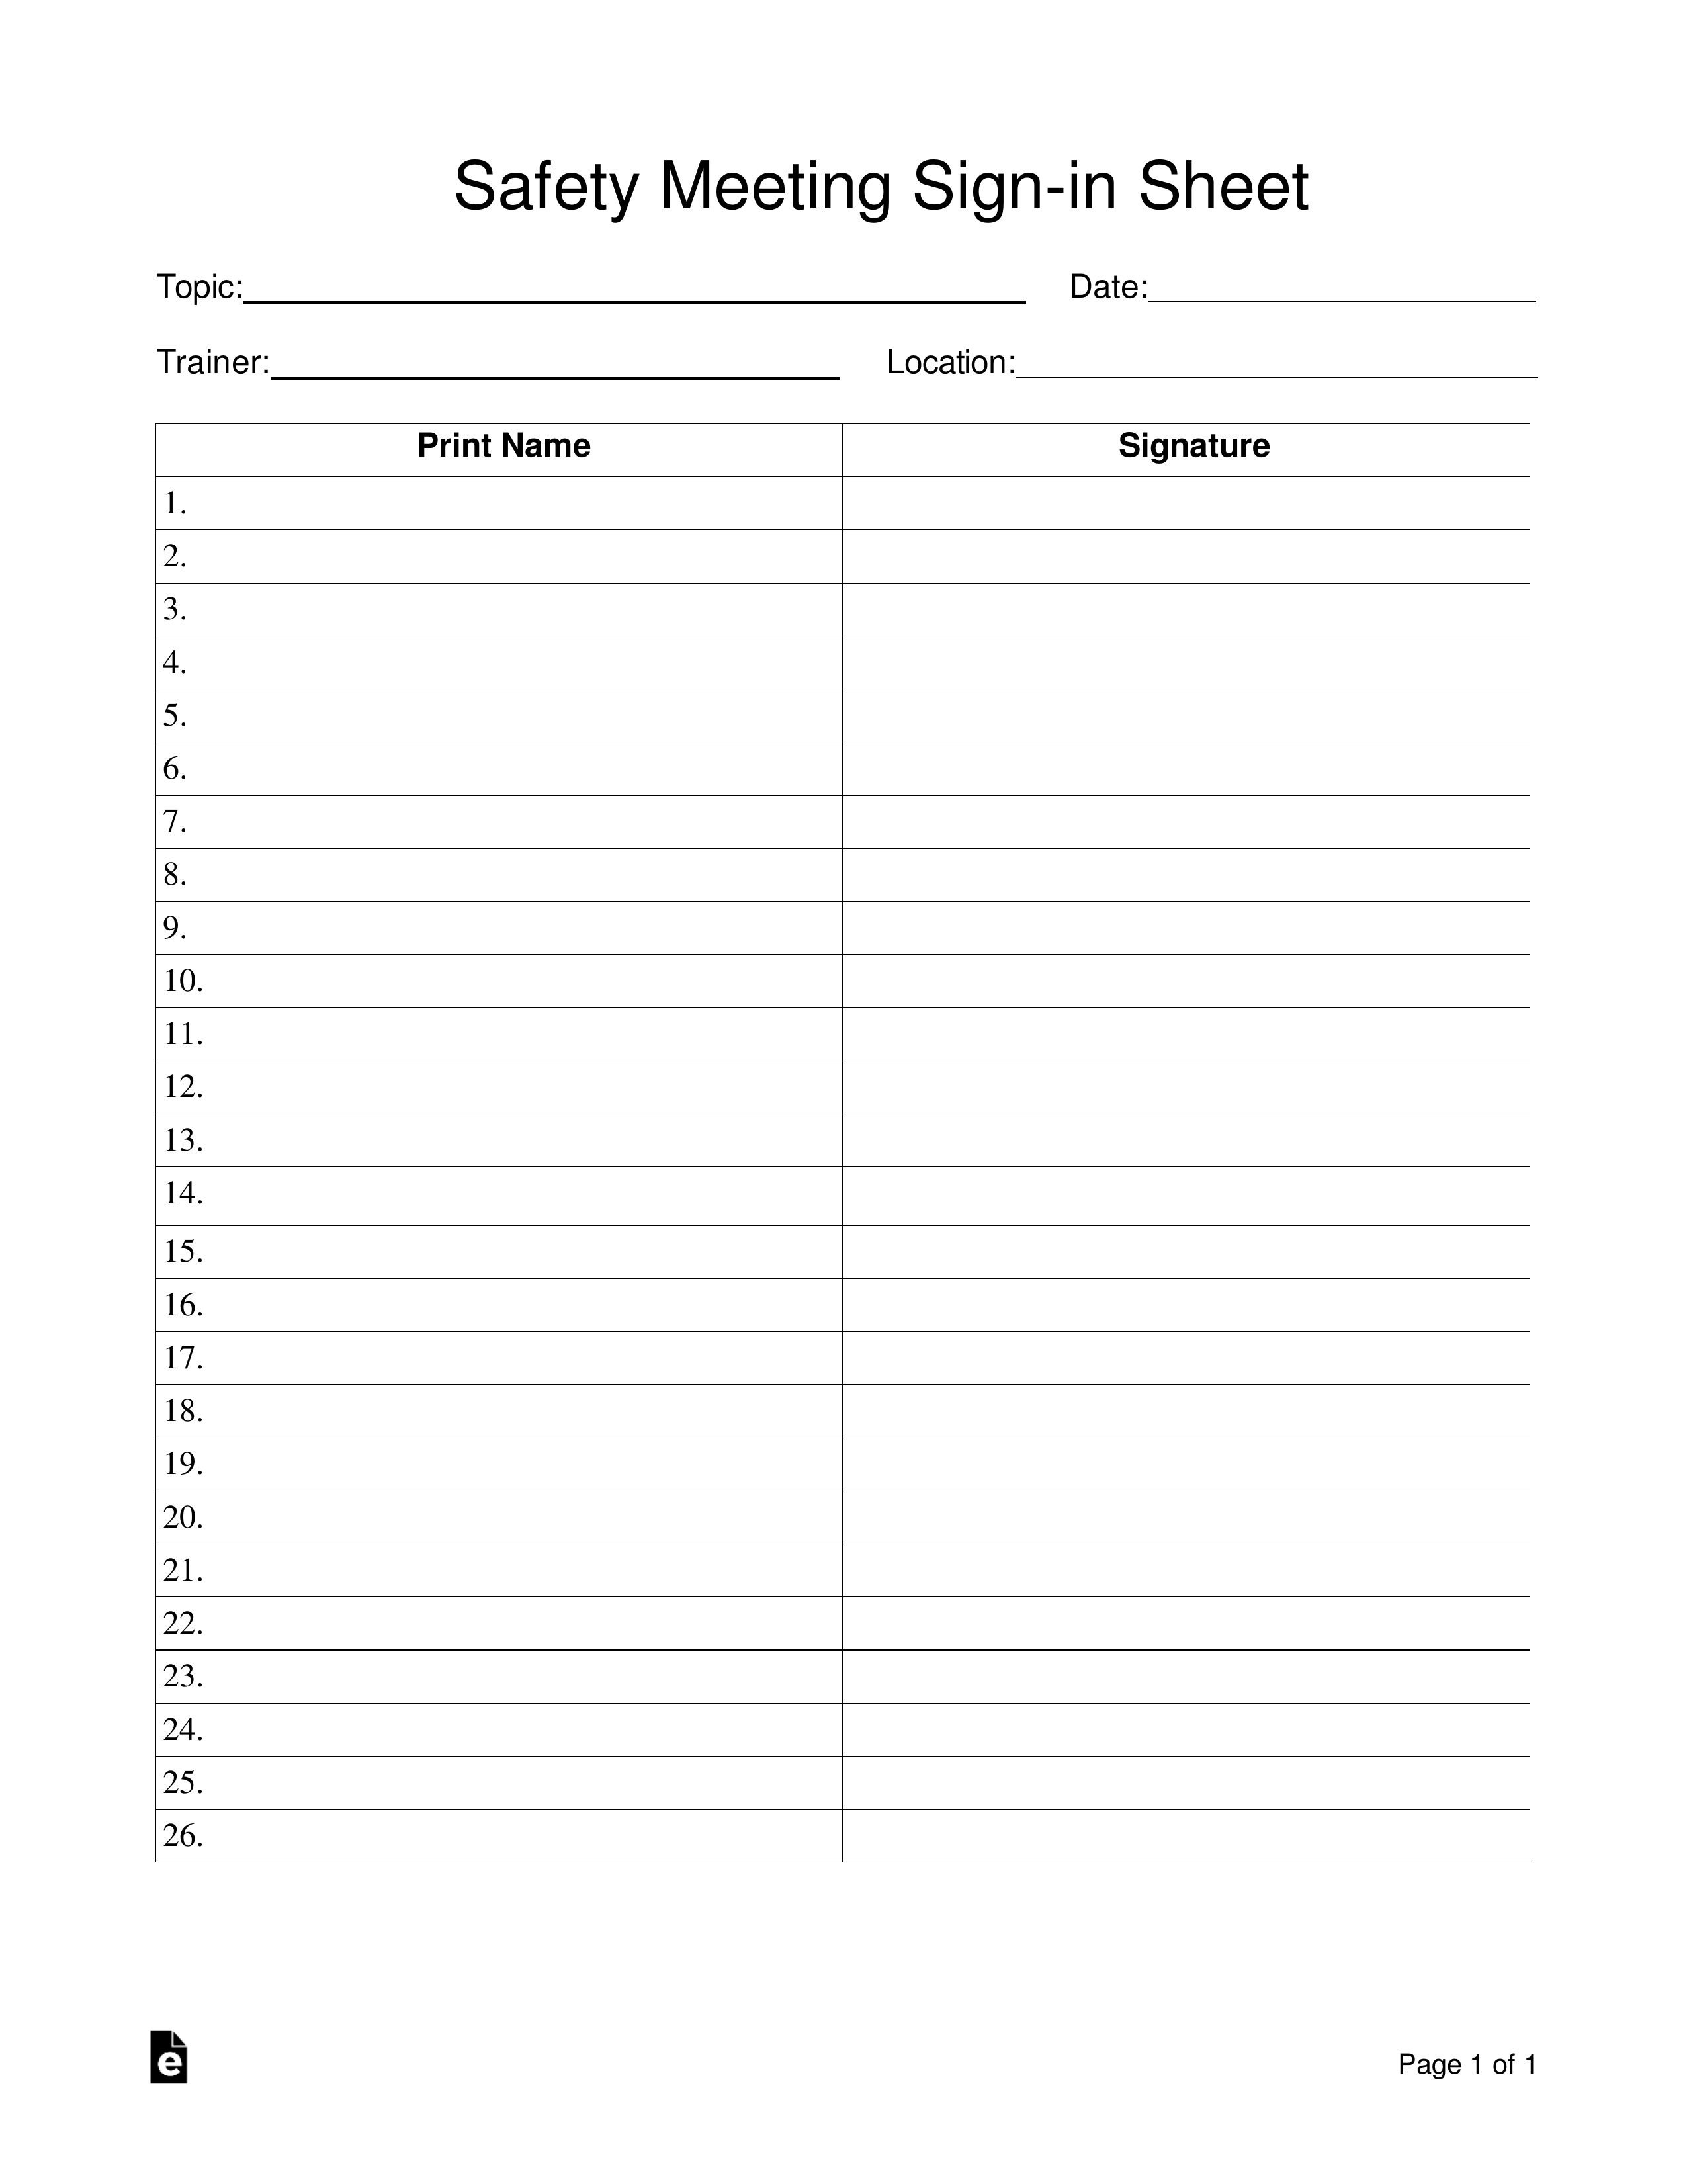 Safety Meeting Sign-in Sheet Template